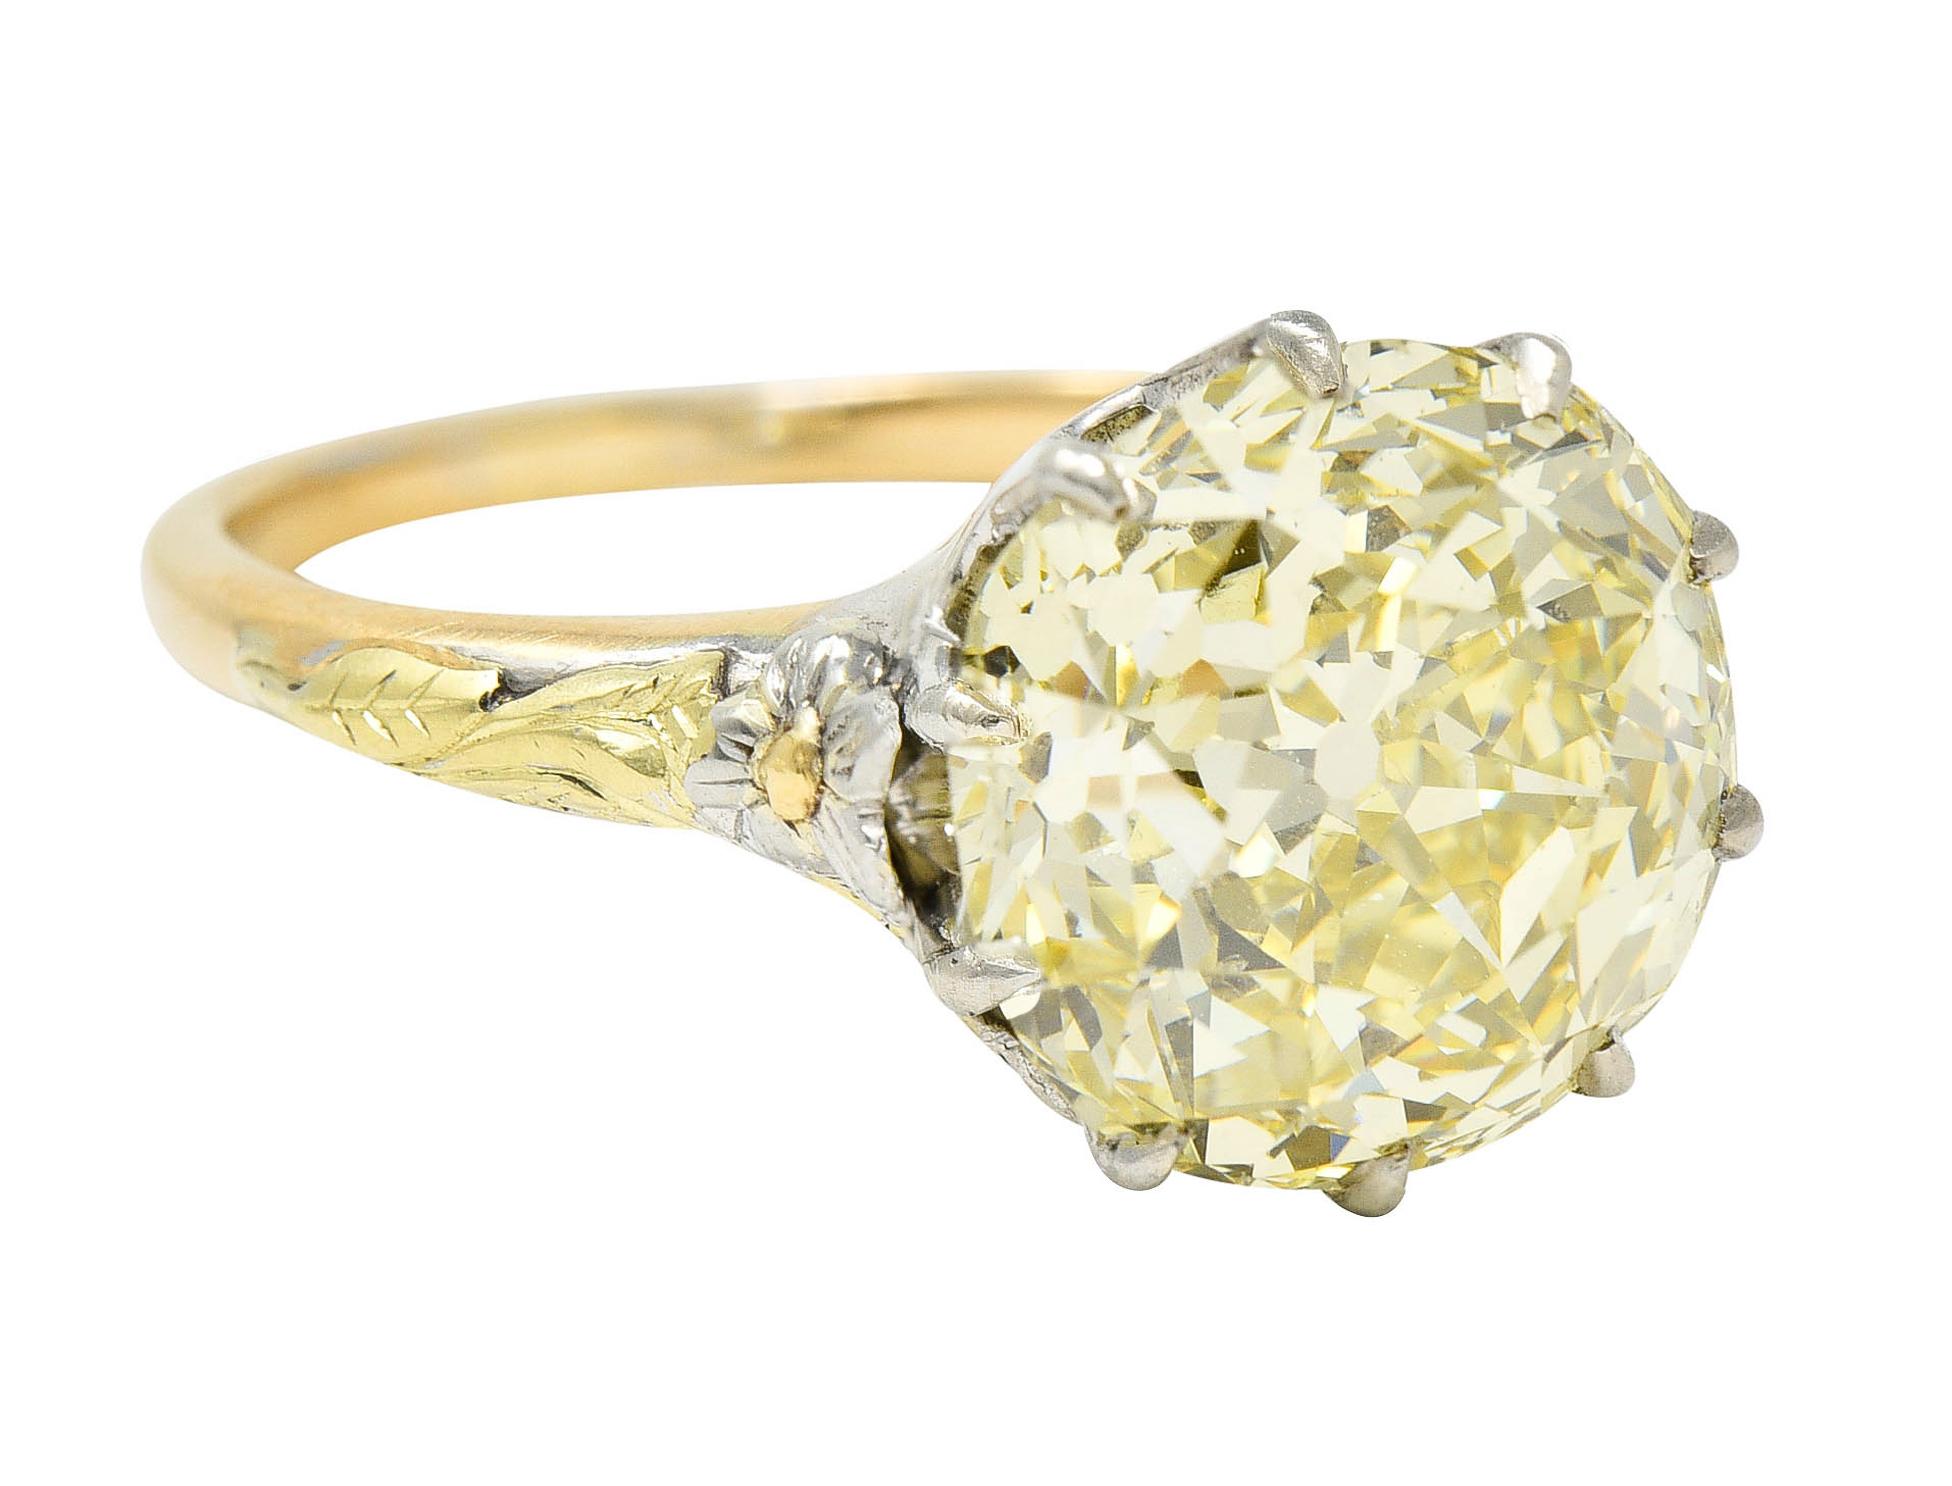 Centering a cushion modified brilliant cut diamond weighing 7.12 carats

Natural fancy yellow in color with SI2 clarity

Talon set in a white gold head and flanked by highly rendered tri-colored gold florals

Completed by a yellow gold